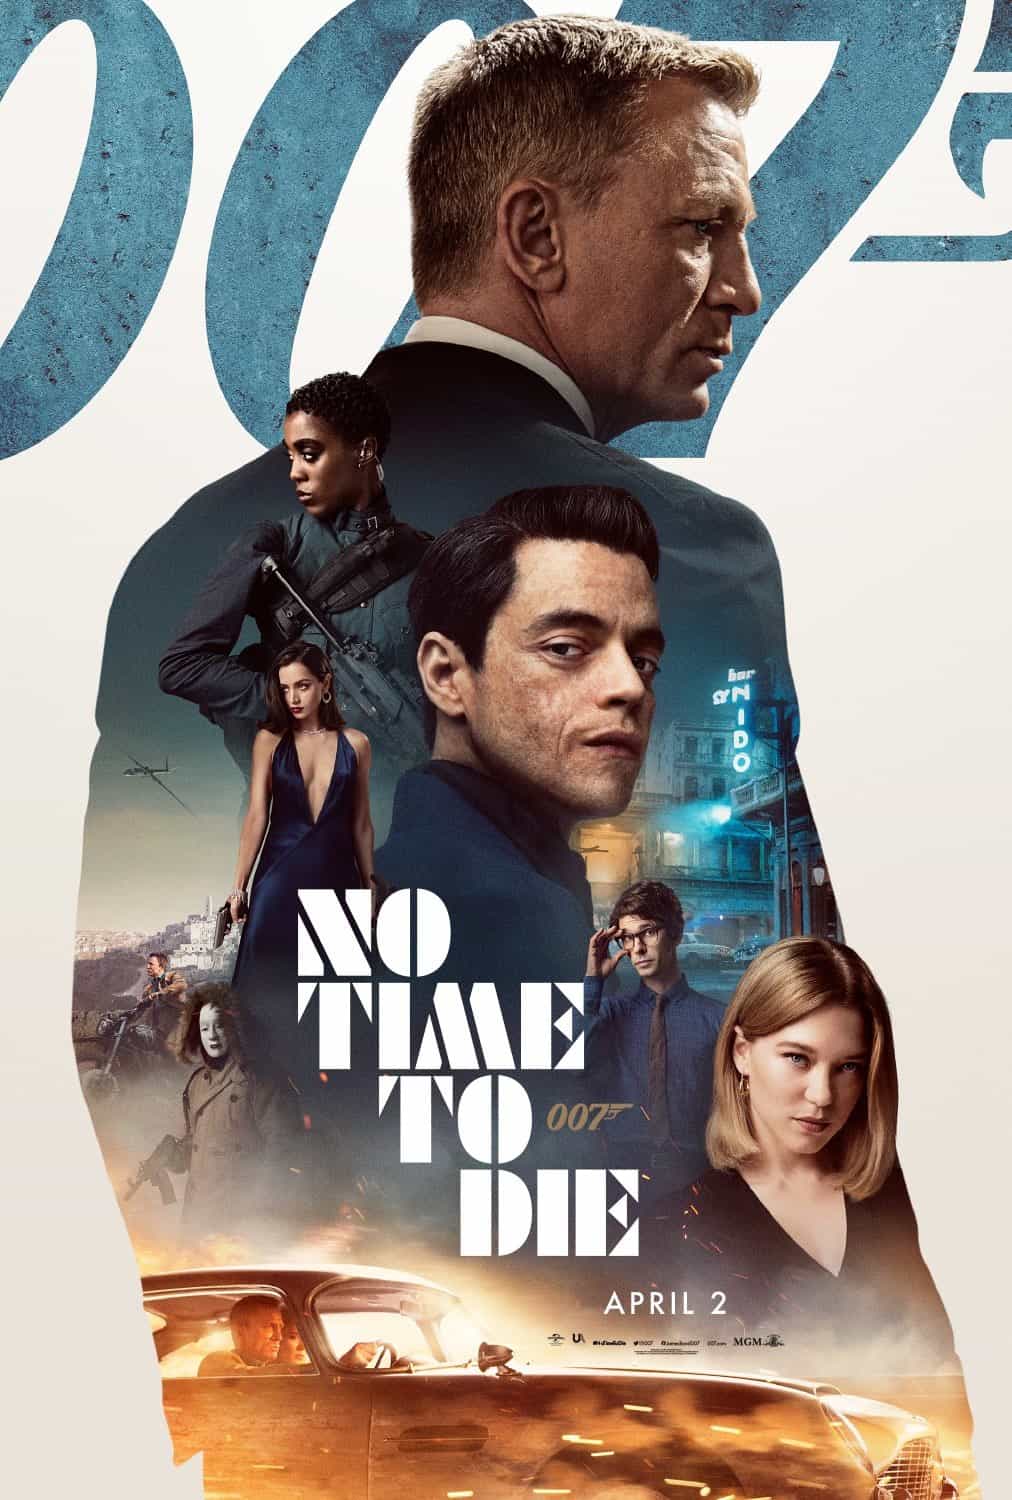 Bond 25 title announced - No Time To Die, released in cinemas 3rd April 2020